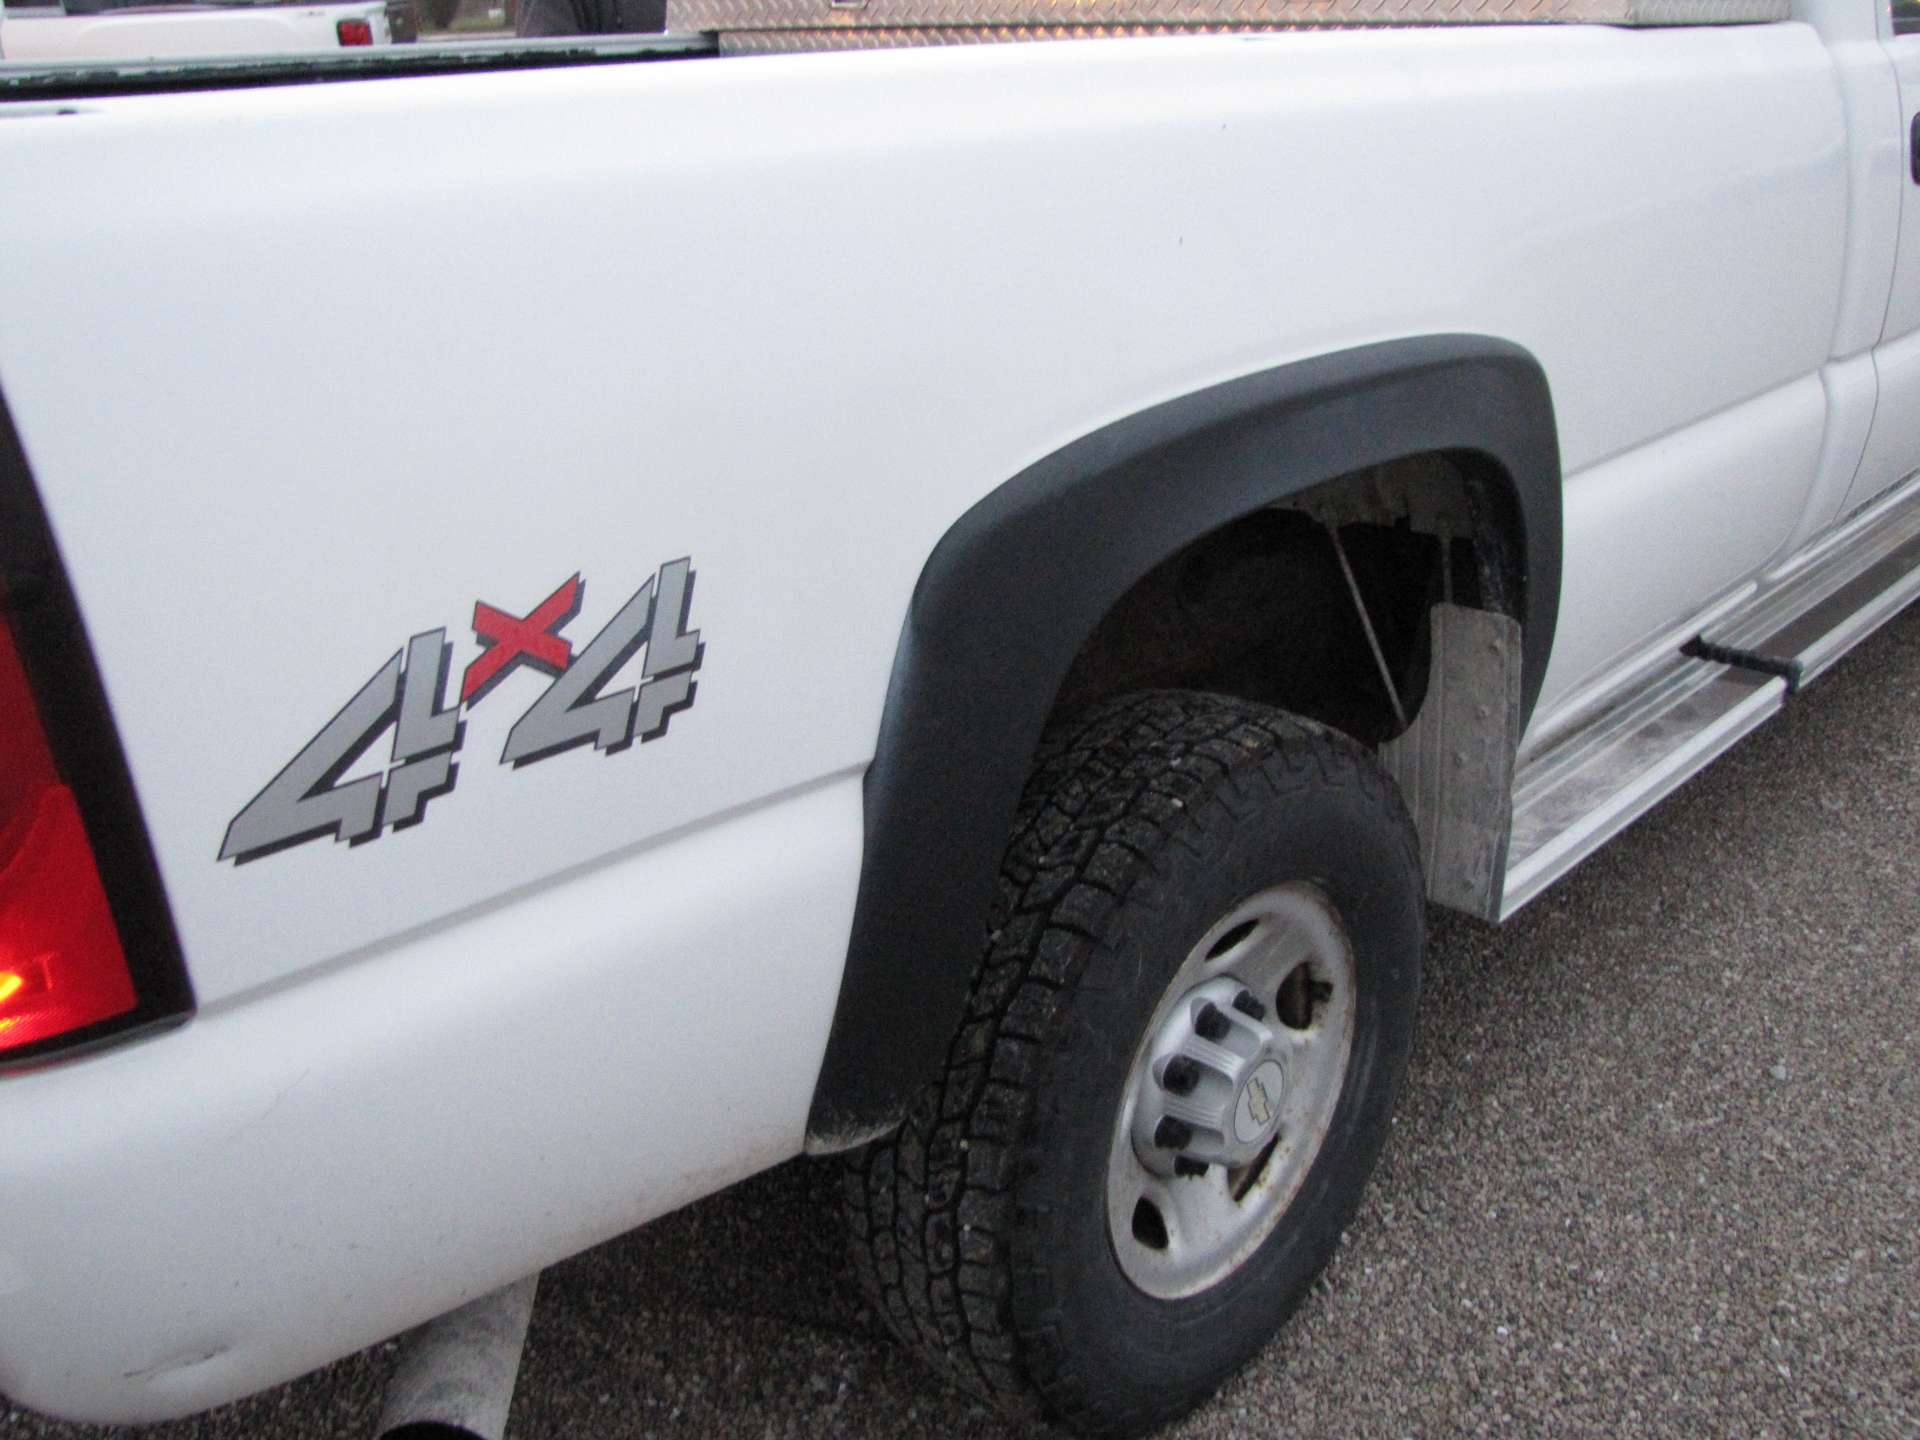 2006 Chevy 2500 HD pickup truck - Image 35 of 65